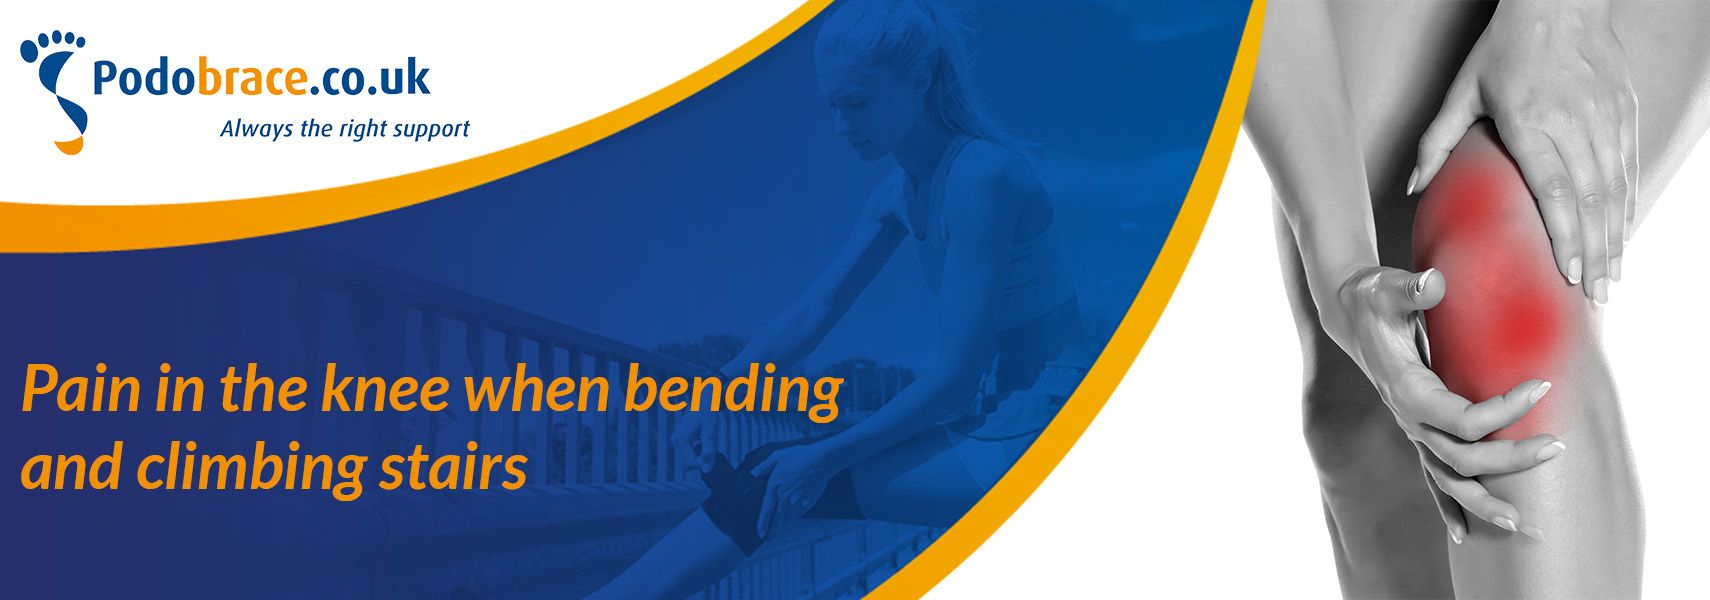 Pain in the knee when bending and climbing stairs